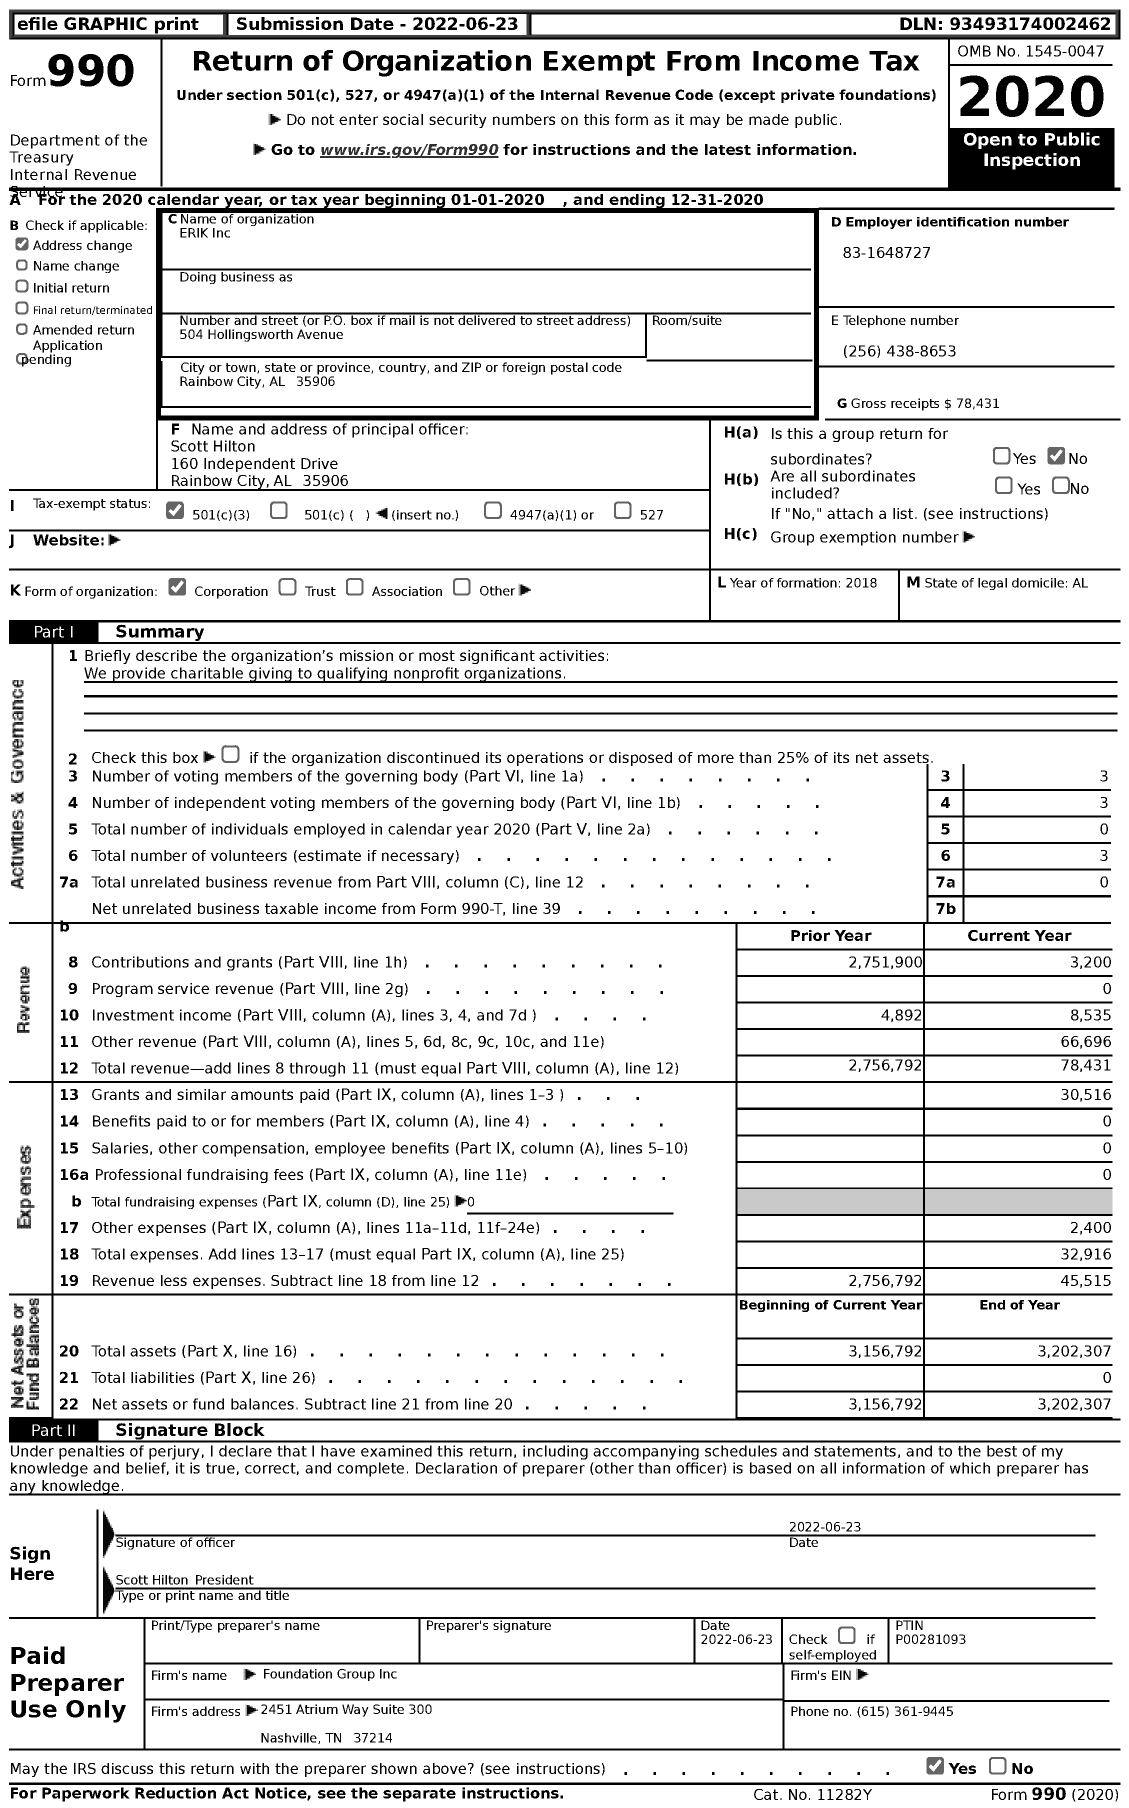 Image of first page of 2020 Form 990 for Erik